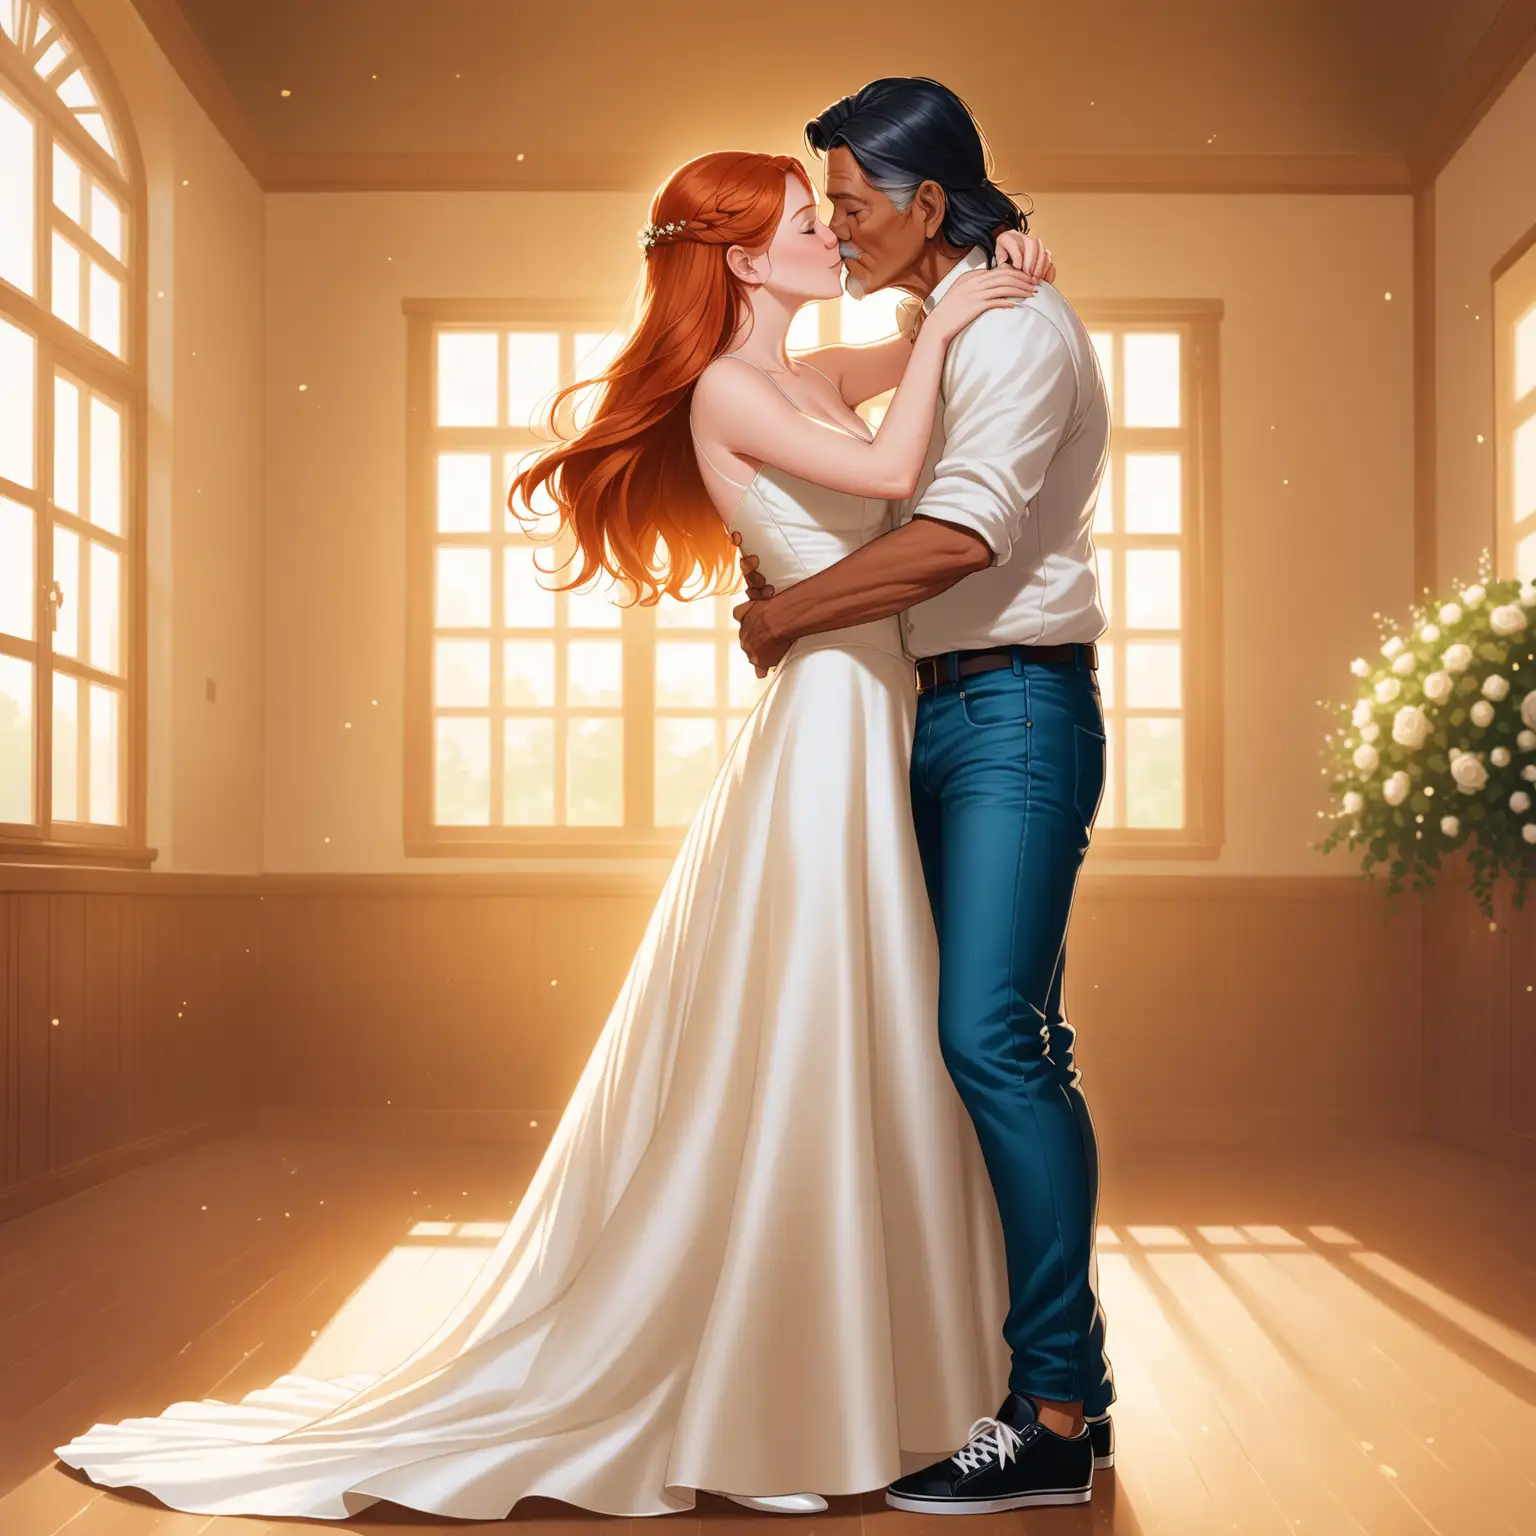 Passionate Slow Dance of an Andean Man and Ginny Weasley in Ivory Wedding Gown